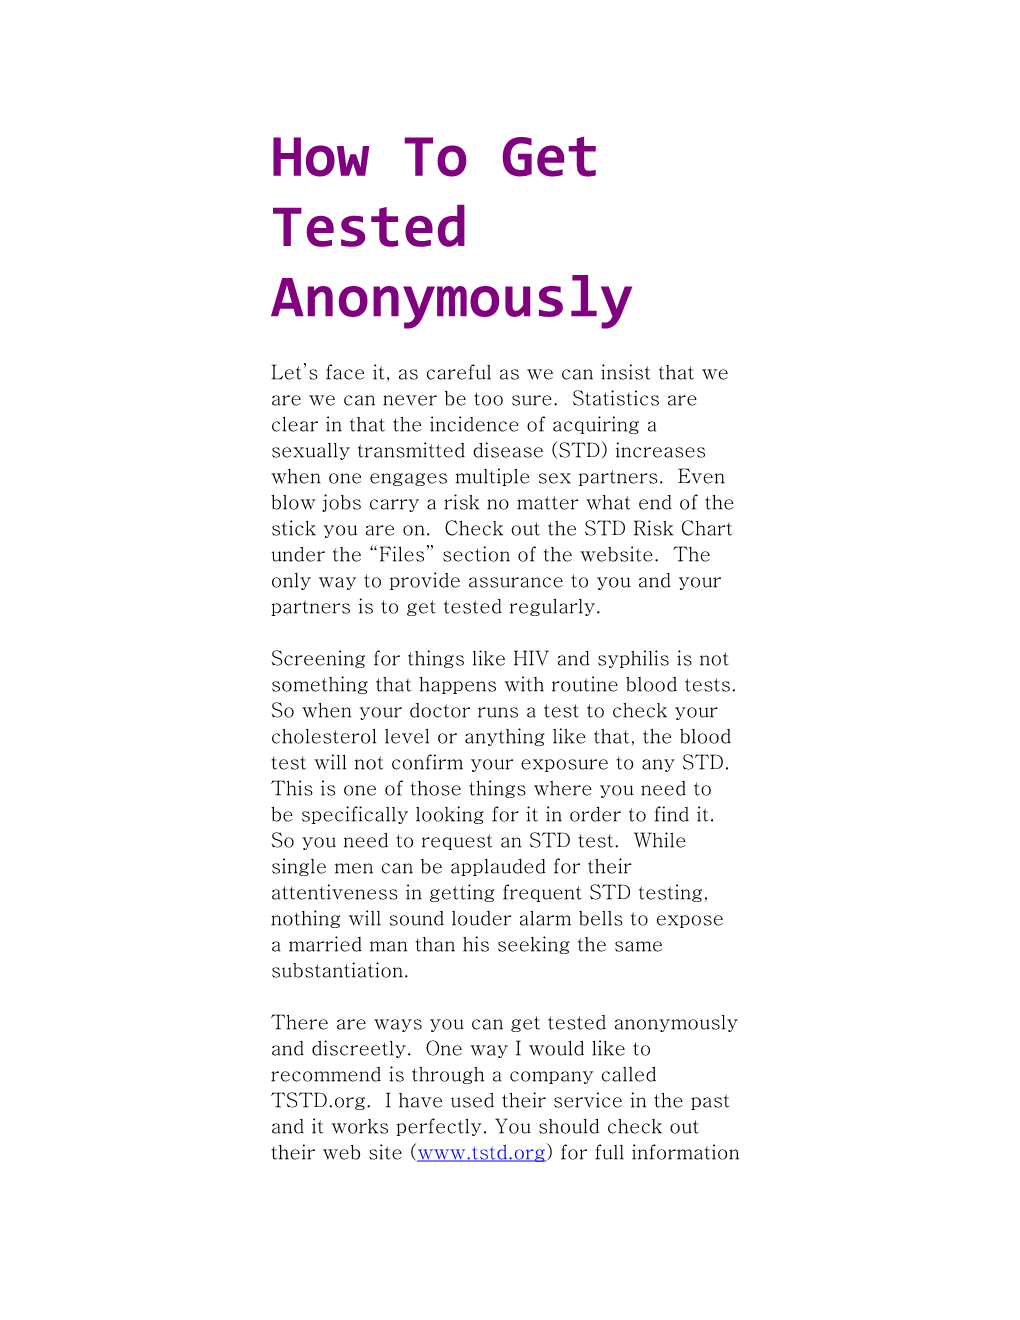 How to Get Tested Anonymously